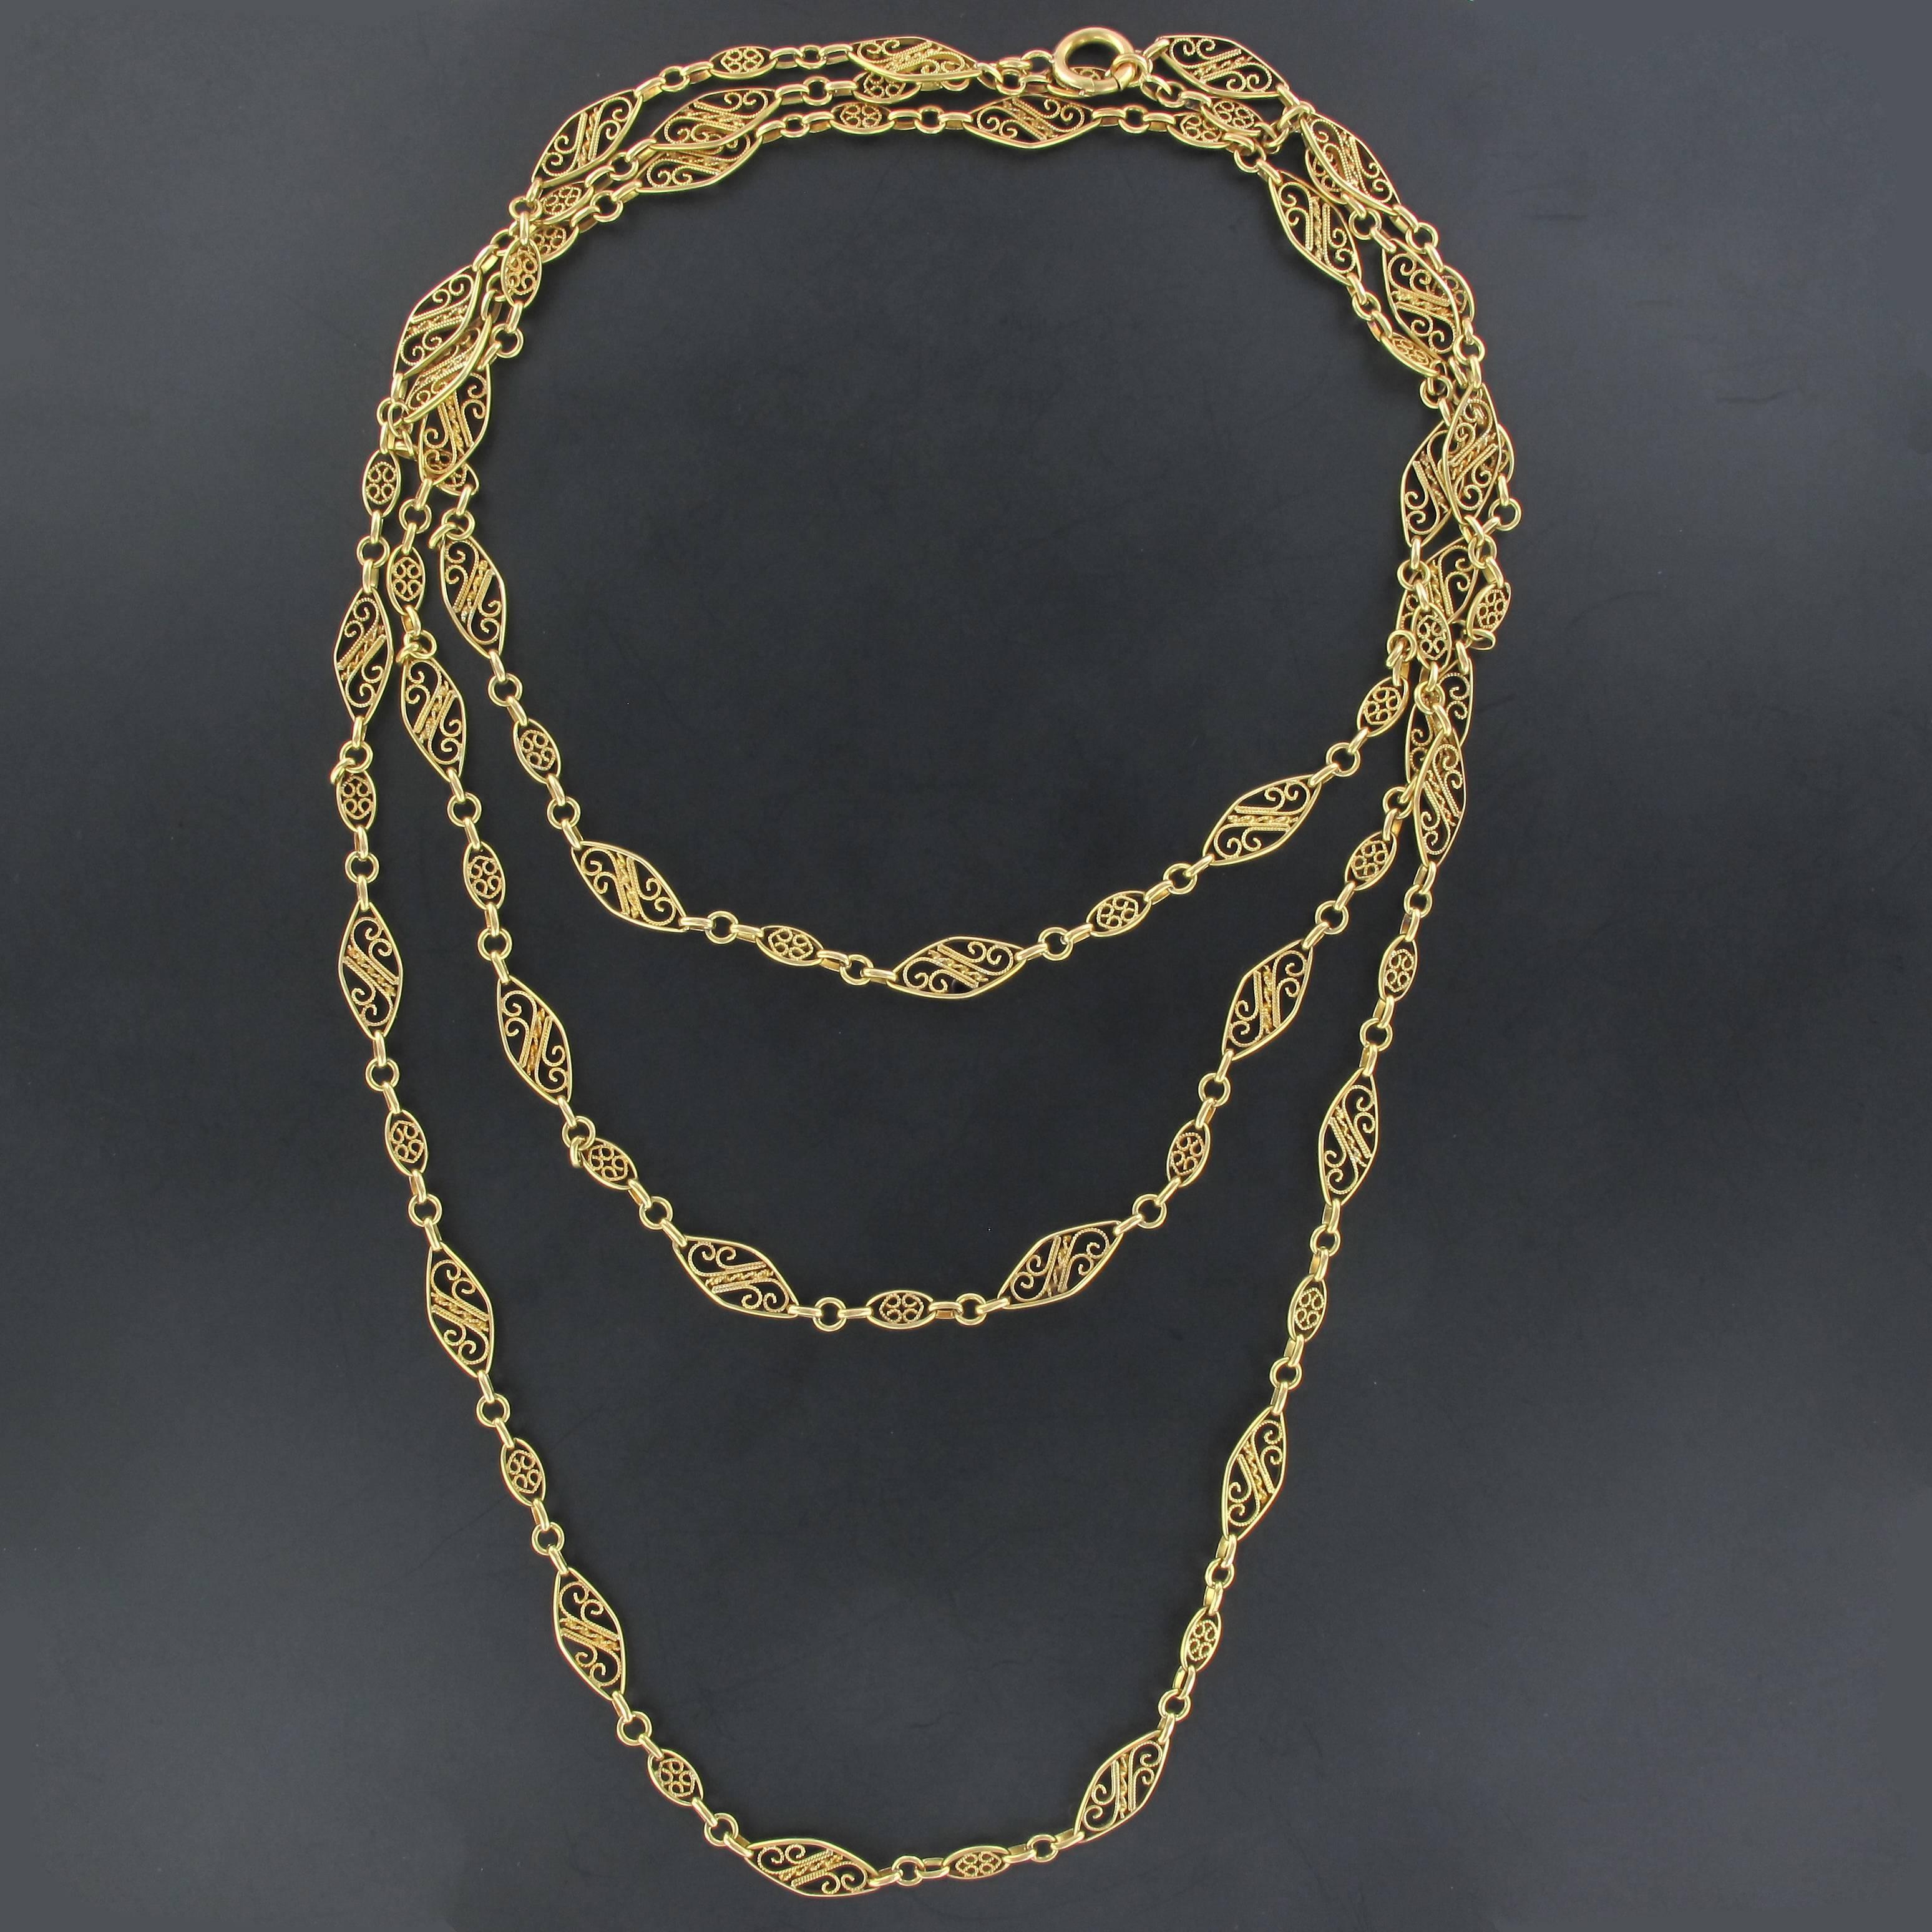 Women's 1900s French Gold Matinee Necklace with Filigree Motifs